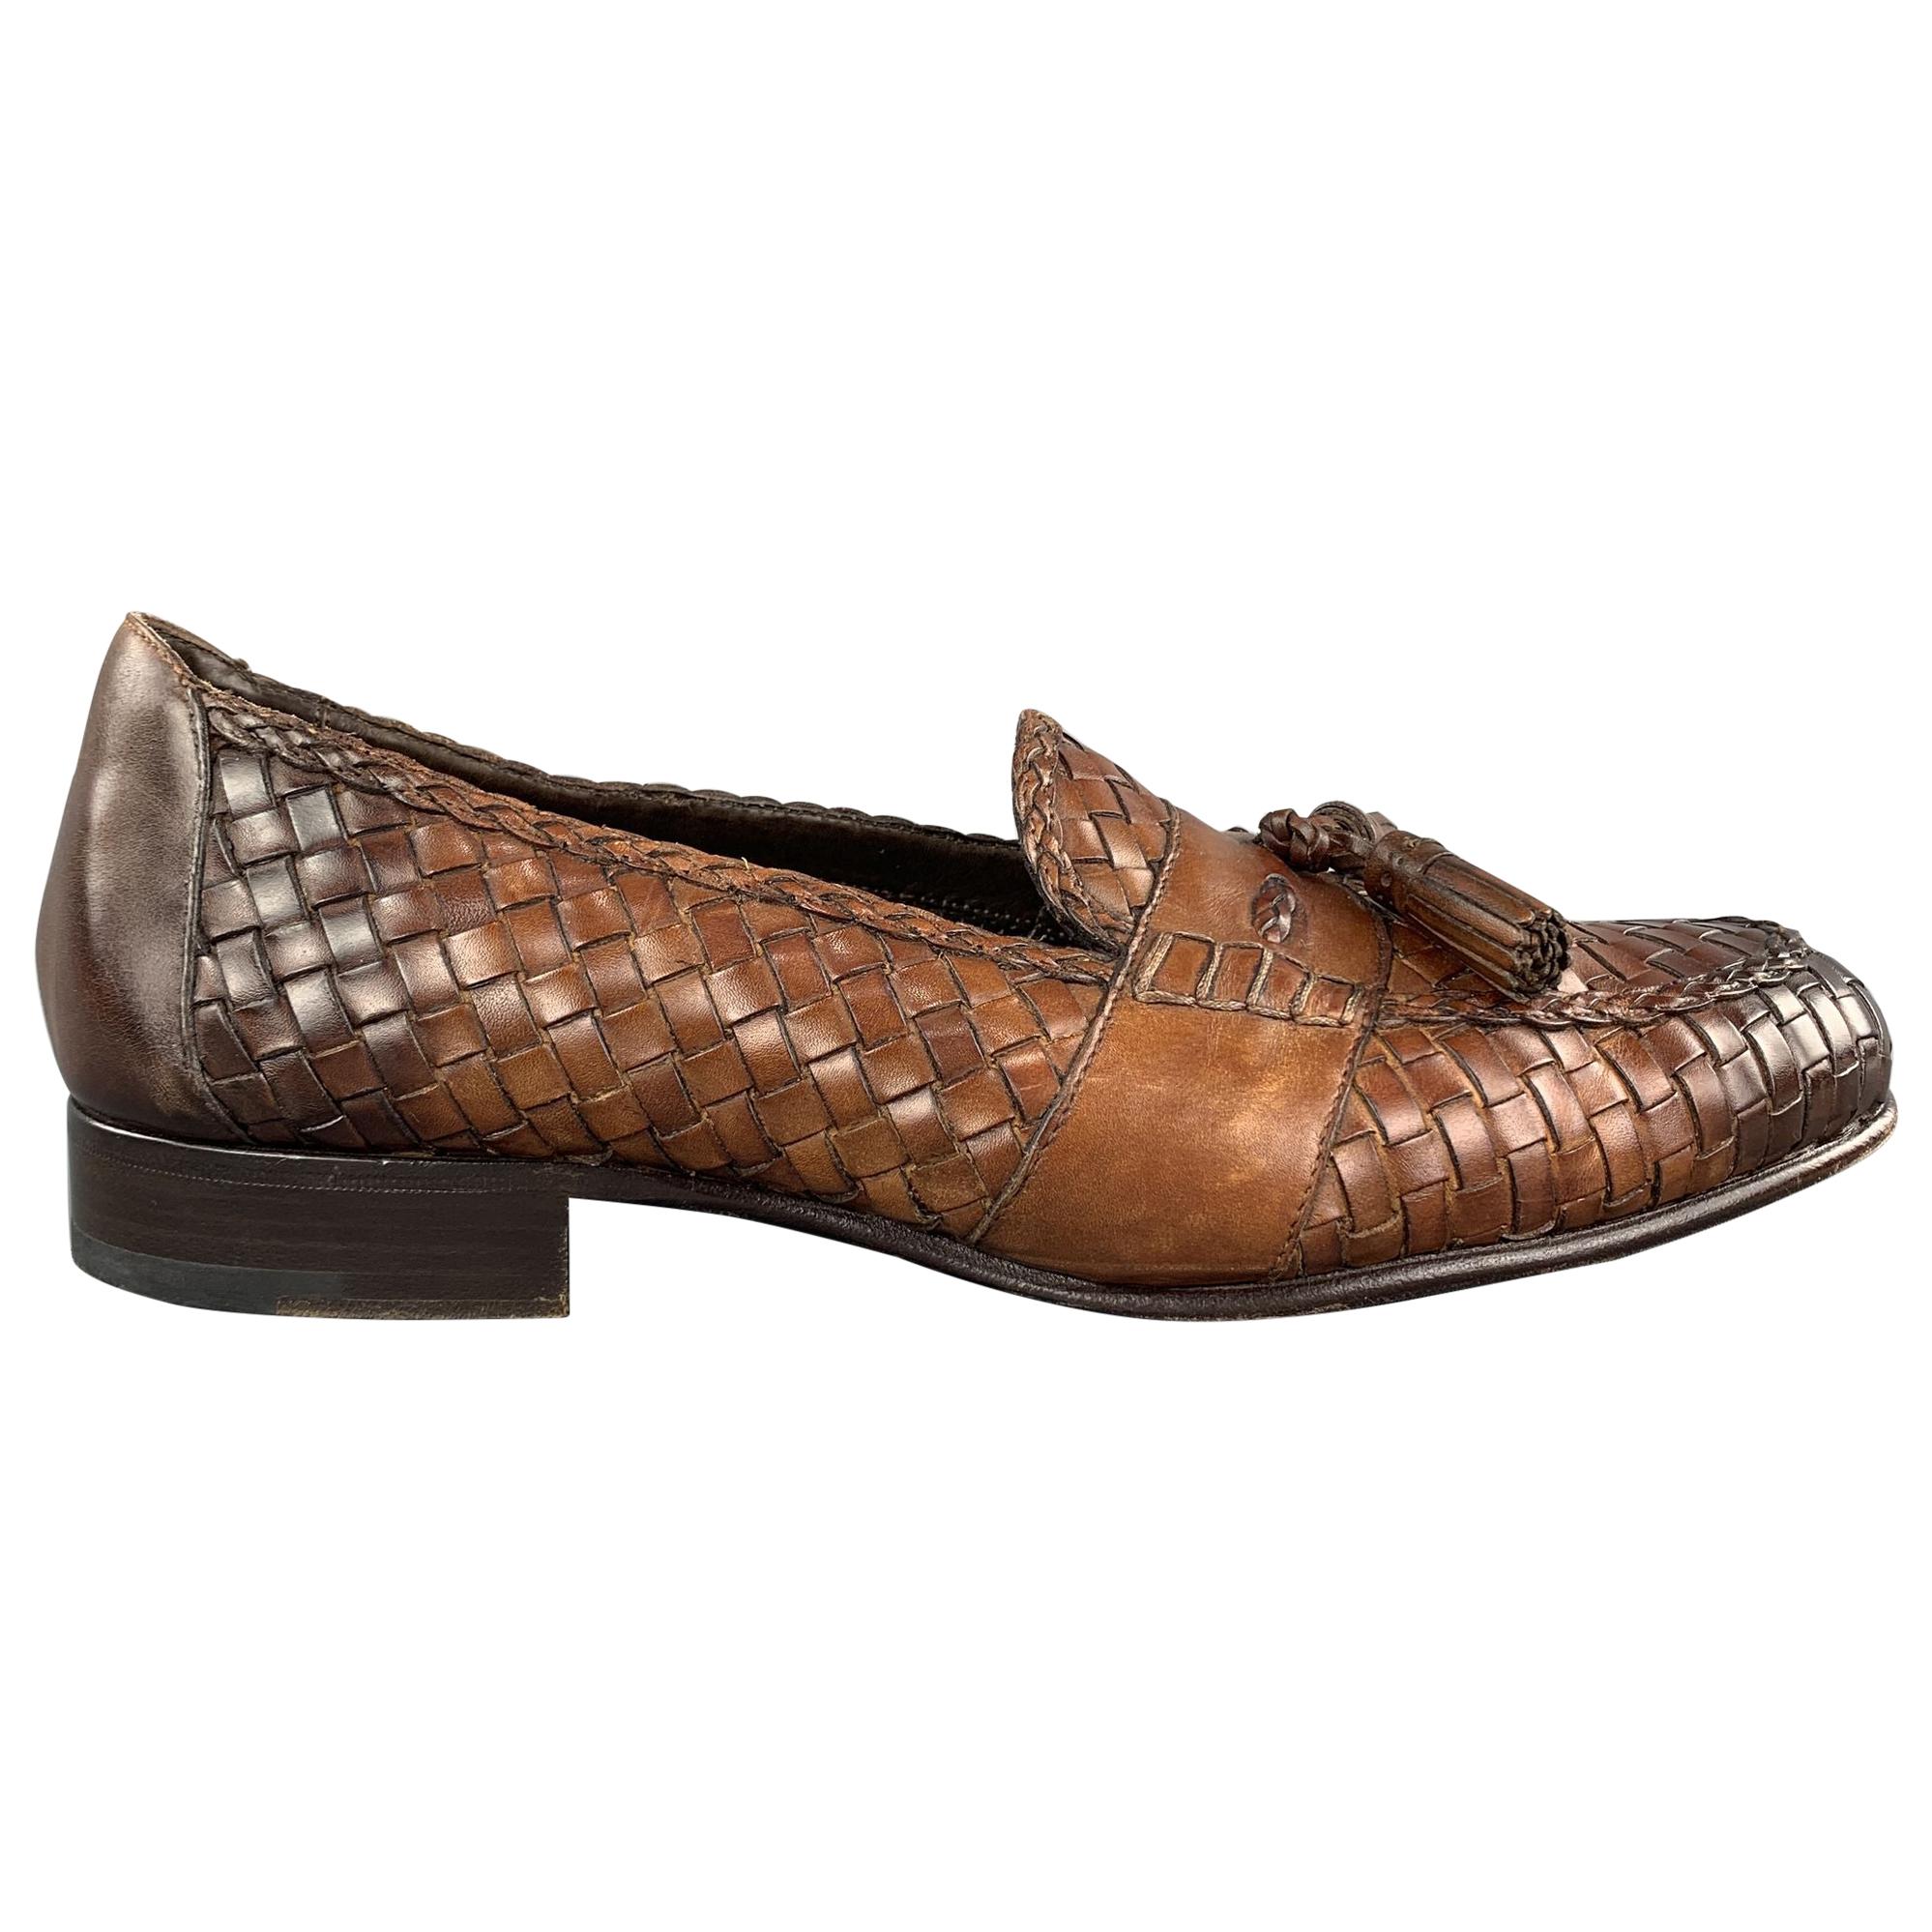 tom ford loafers sale